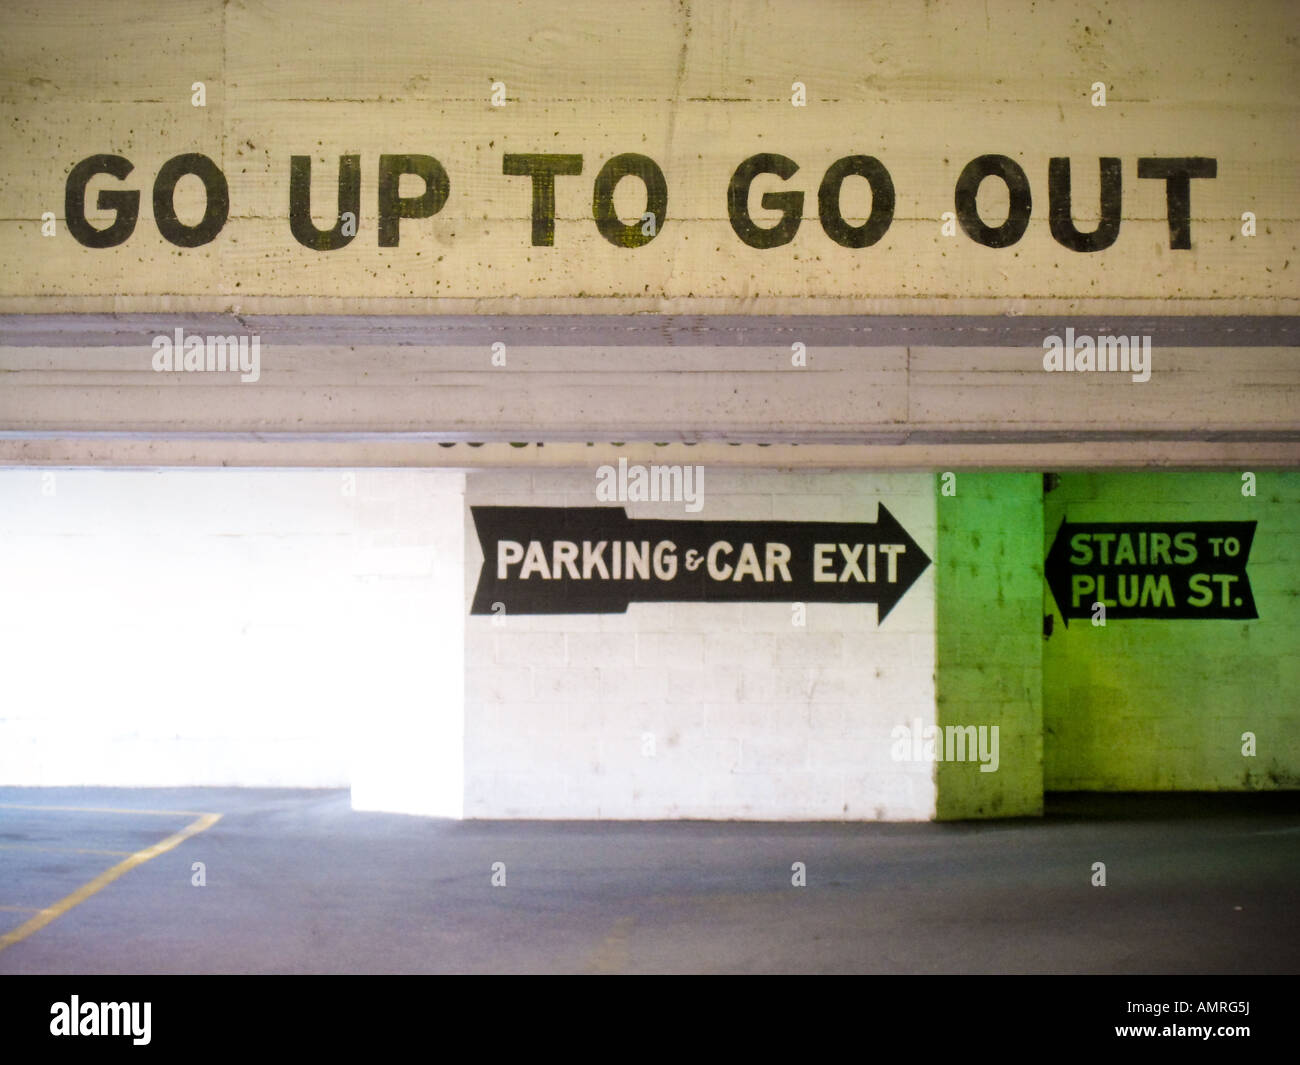 Go up to go Out - painted in black with a stencil on the cement header of a parking garage. A large arrow guides to the exit. Stock Photo